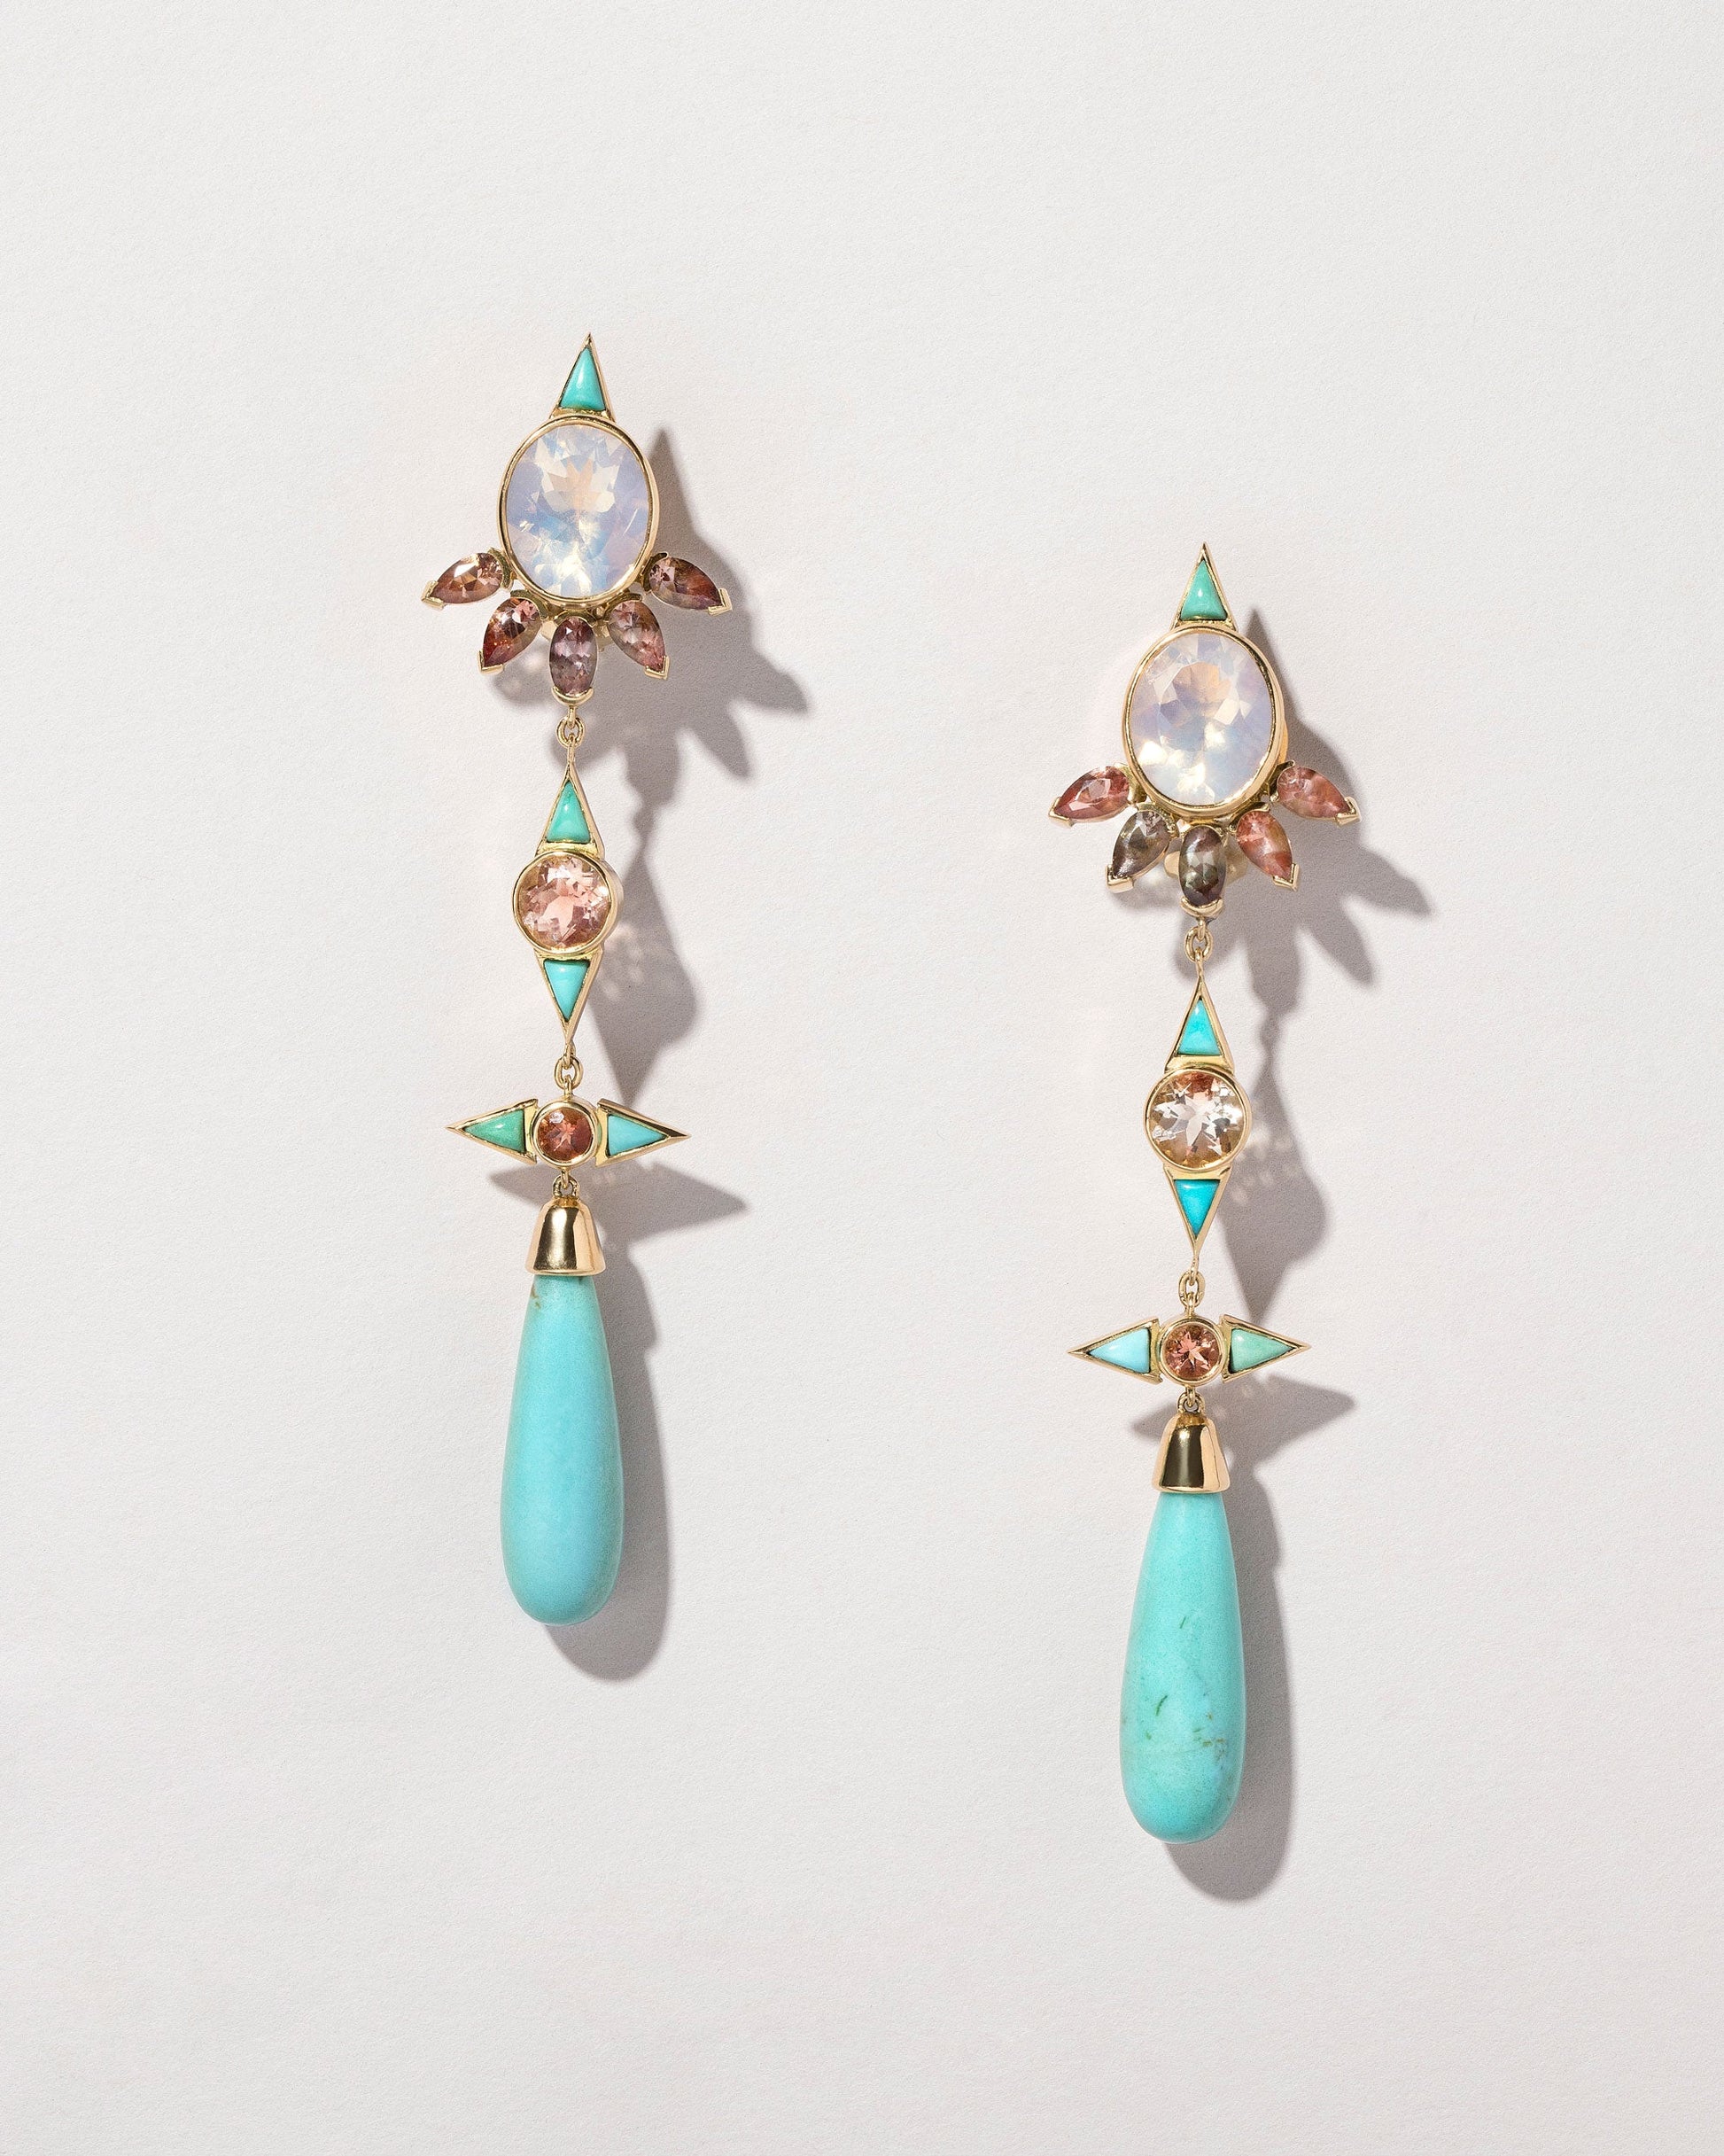  Opal, Sunstone & Turquoise Earrings on light color background.